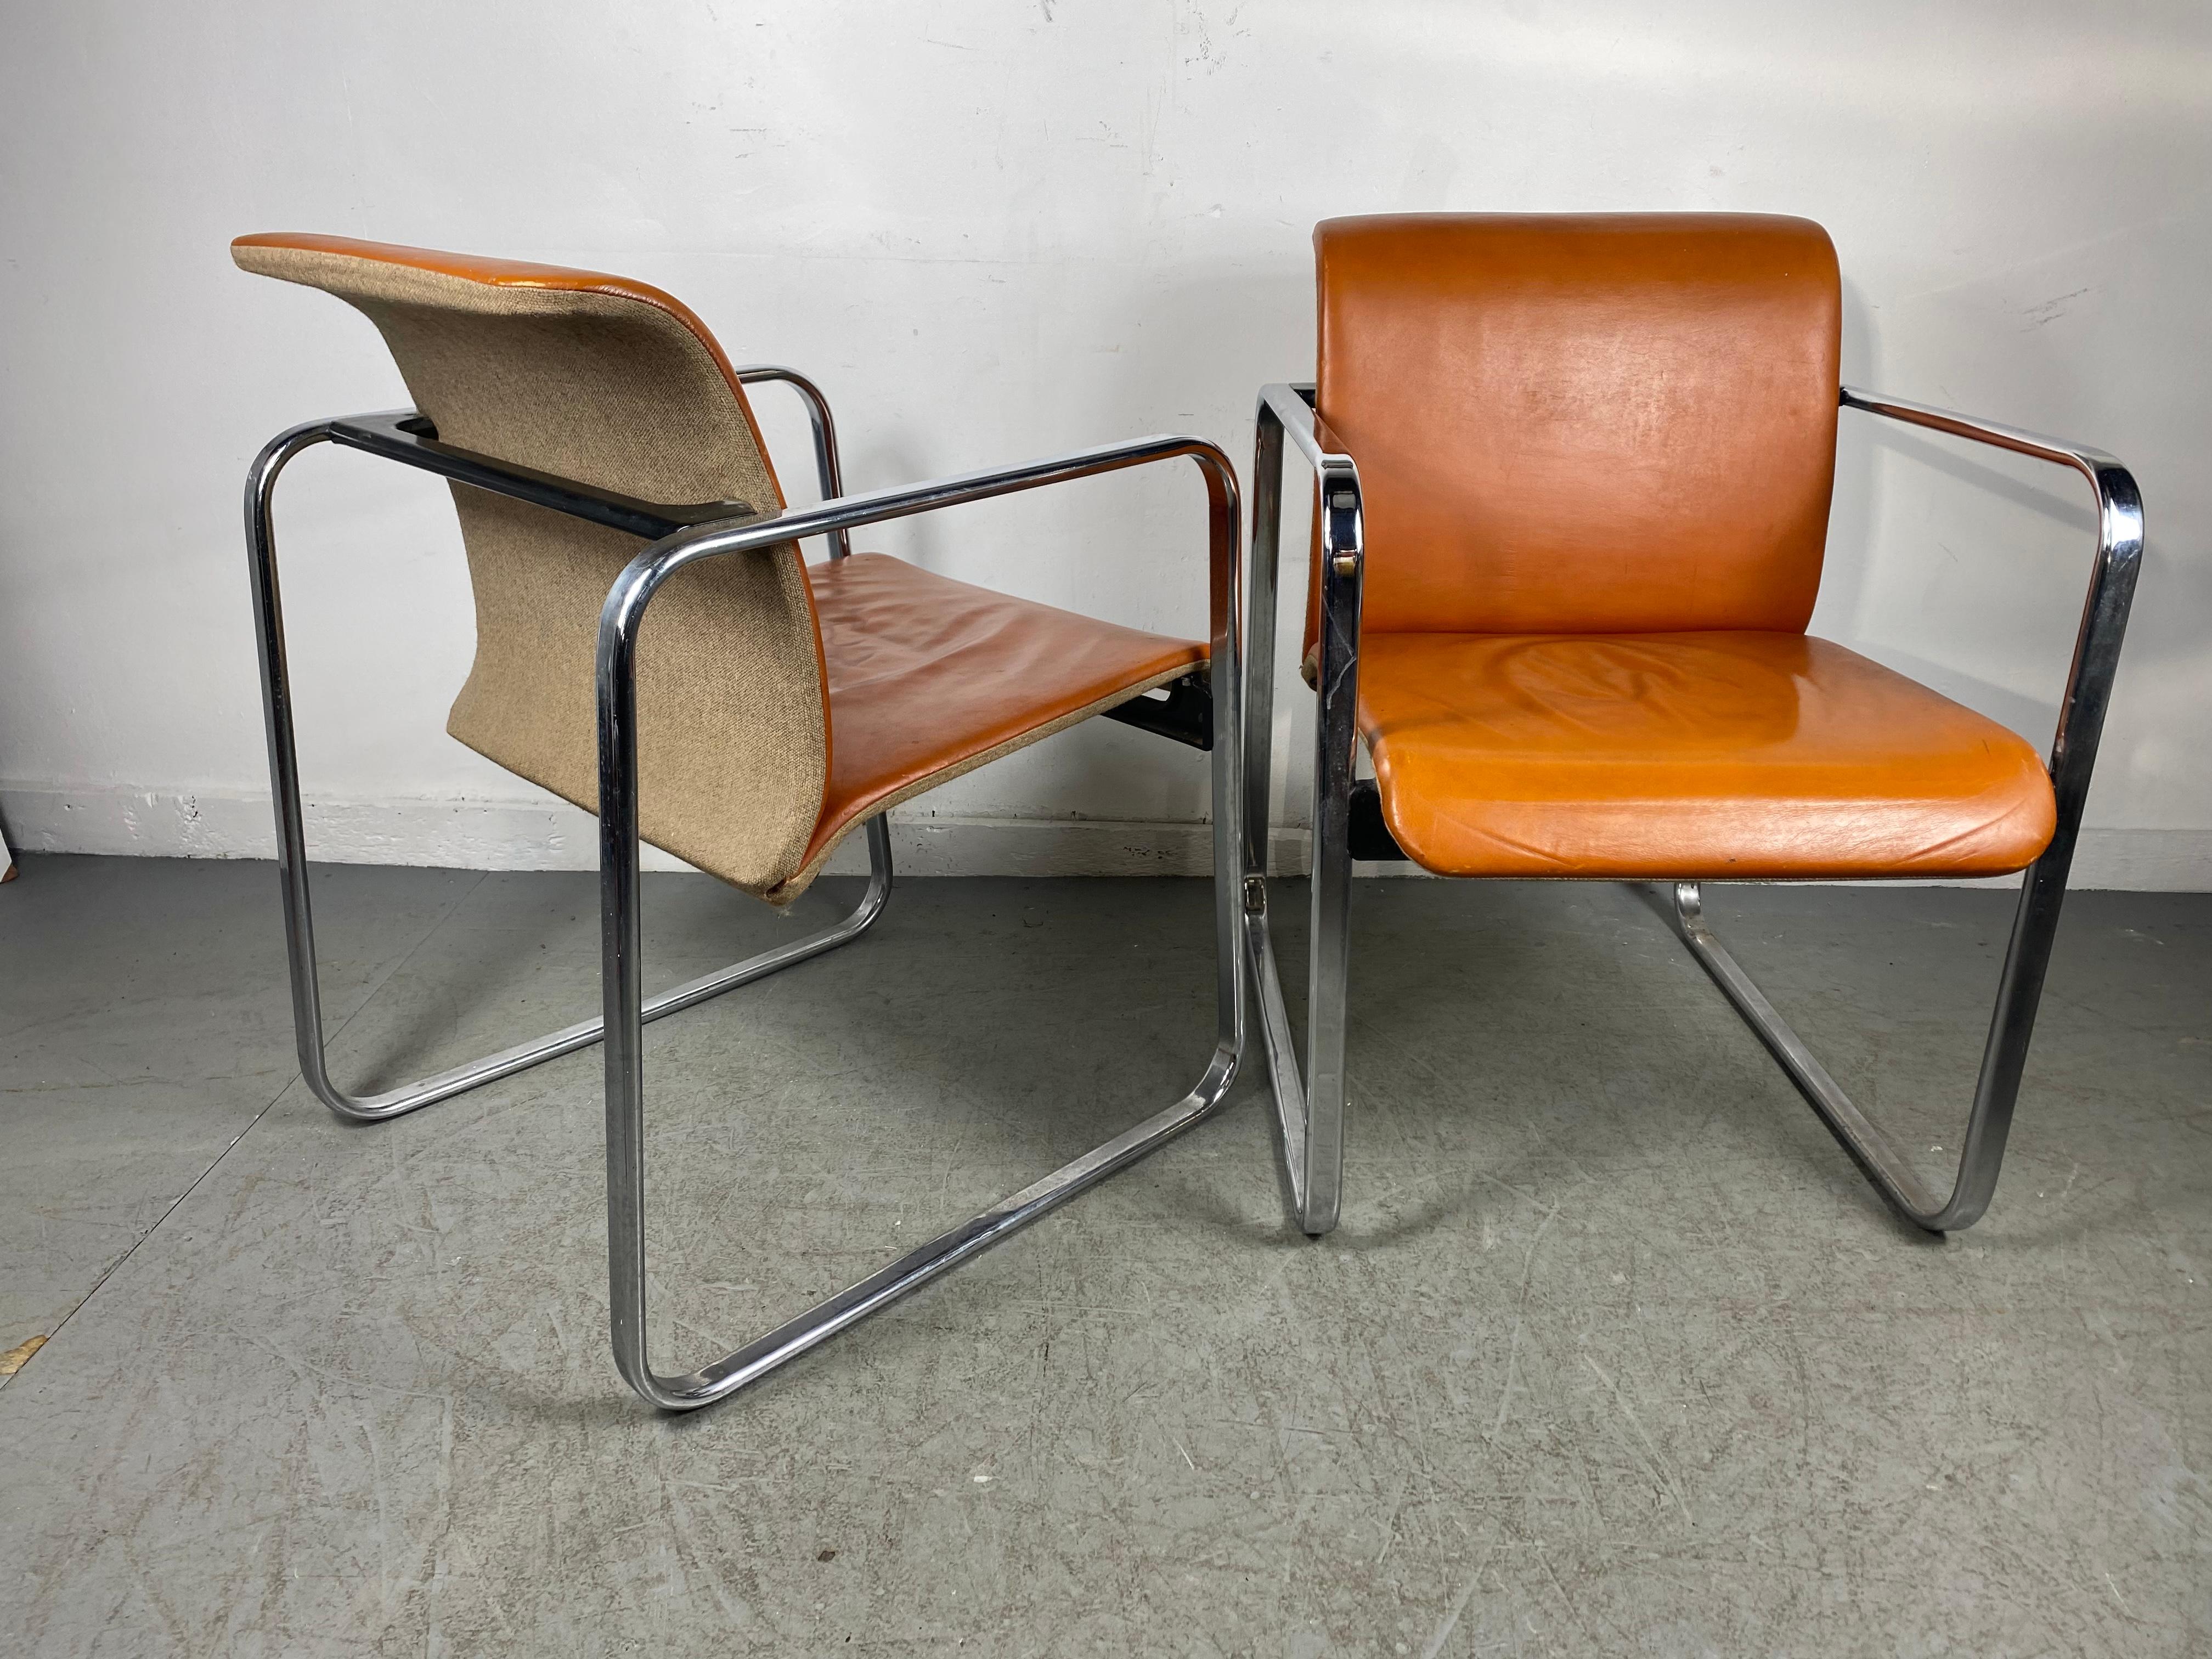 Metal Early Leather & Chrome Tubular Chairs by Peter Protzman for Herman Miller